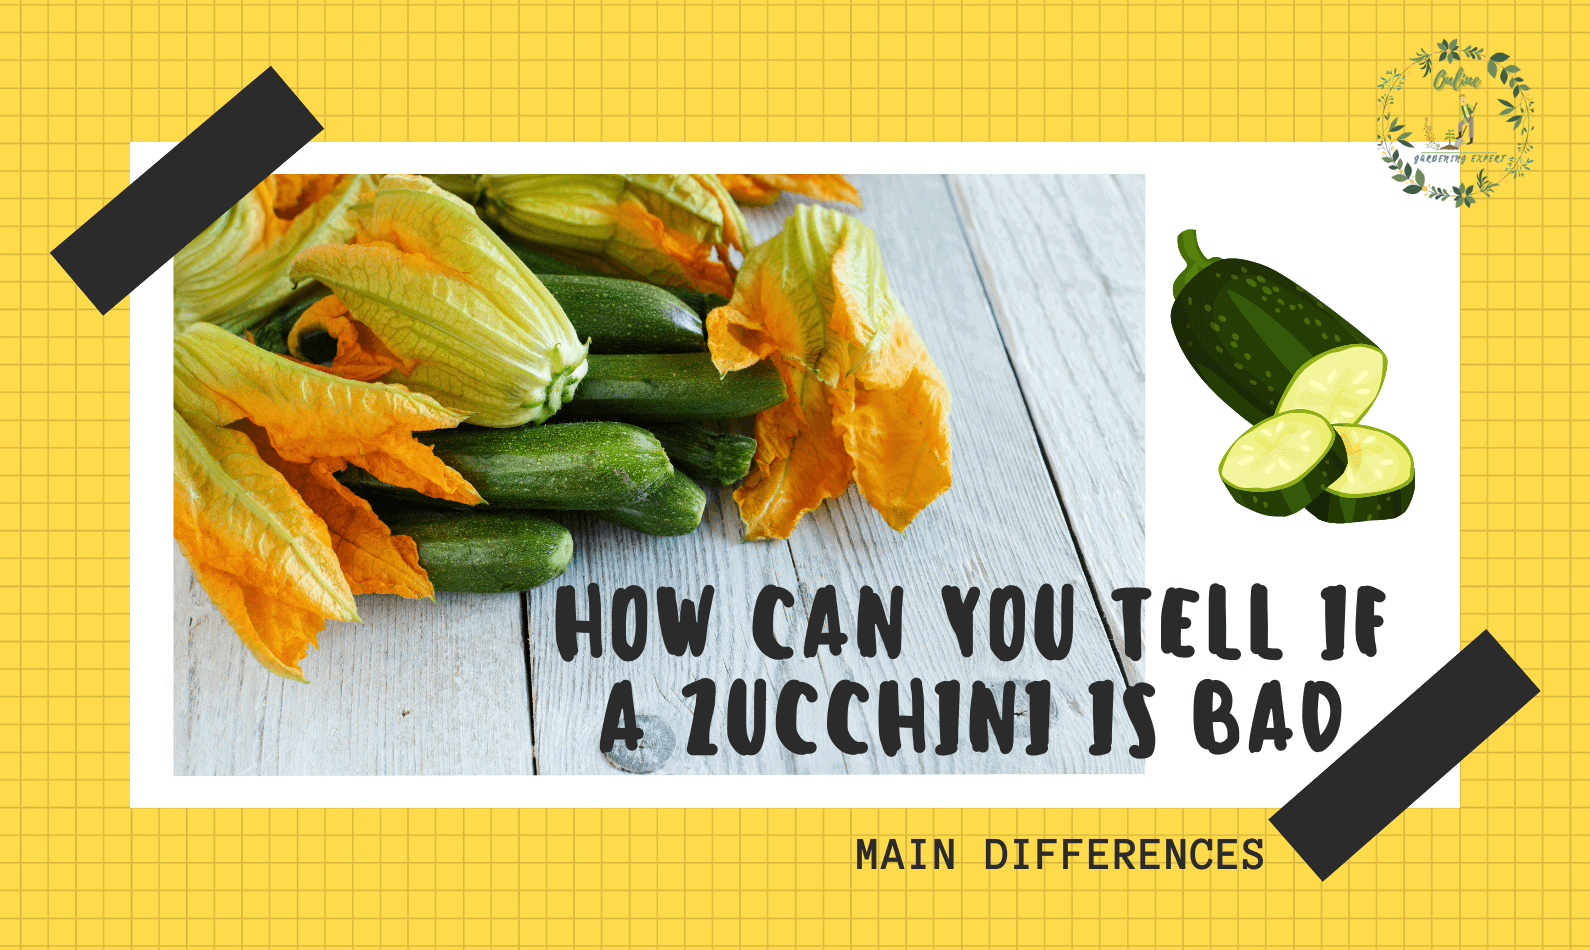 how can you tell if a zucchini is bad